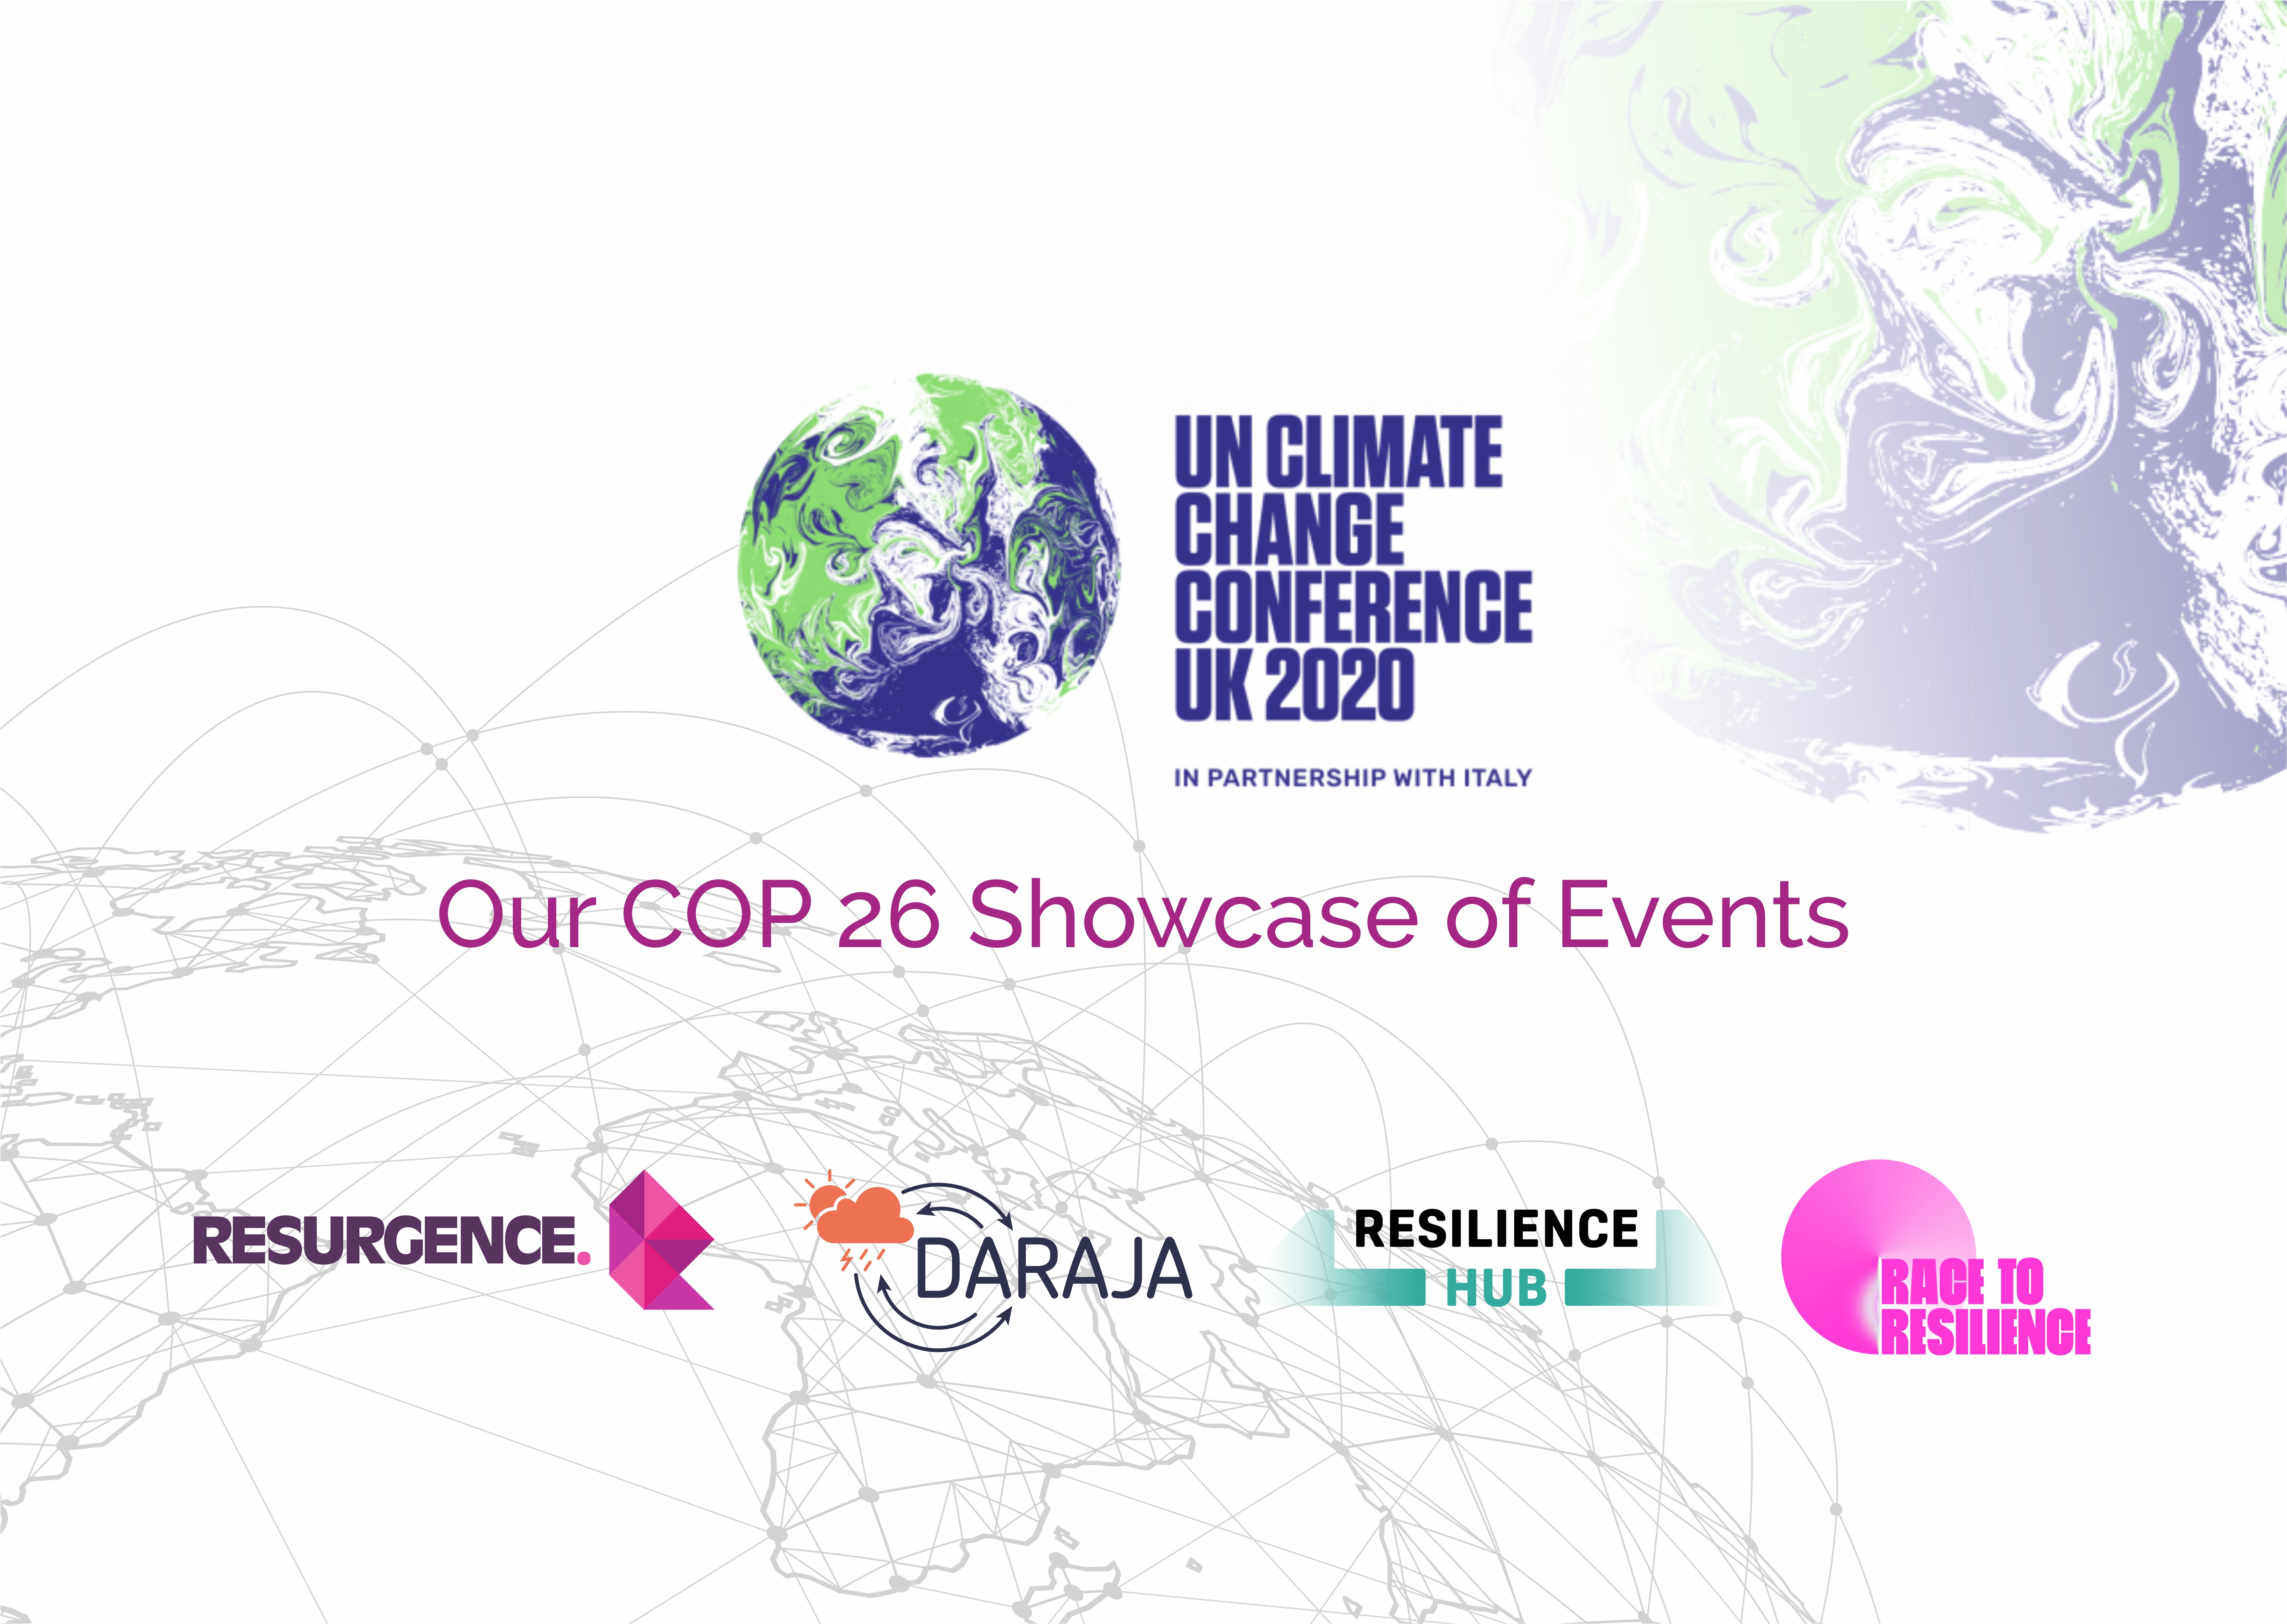 Resurgence Showcase of events from COP26